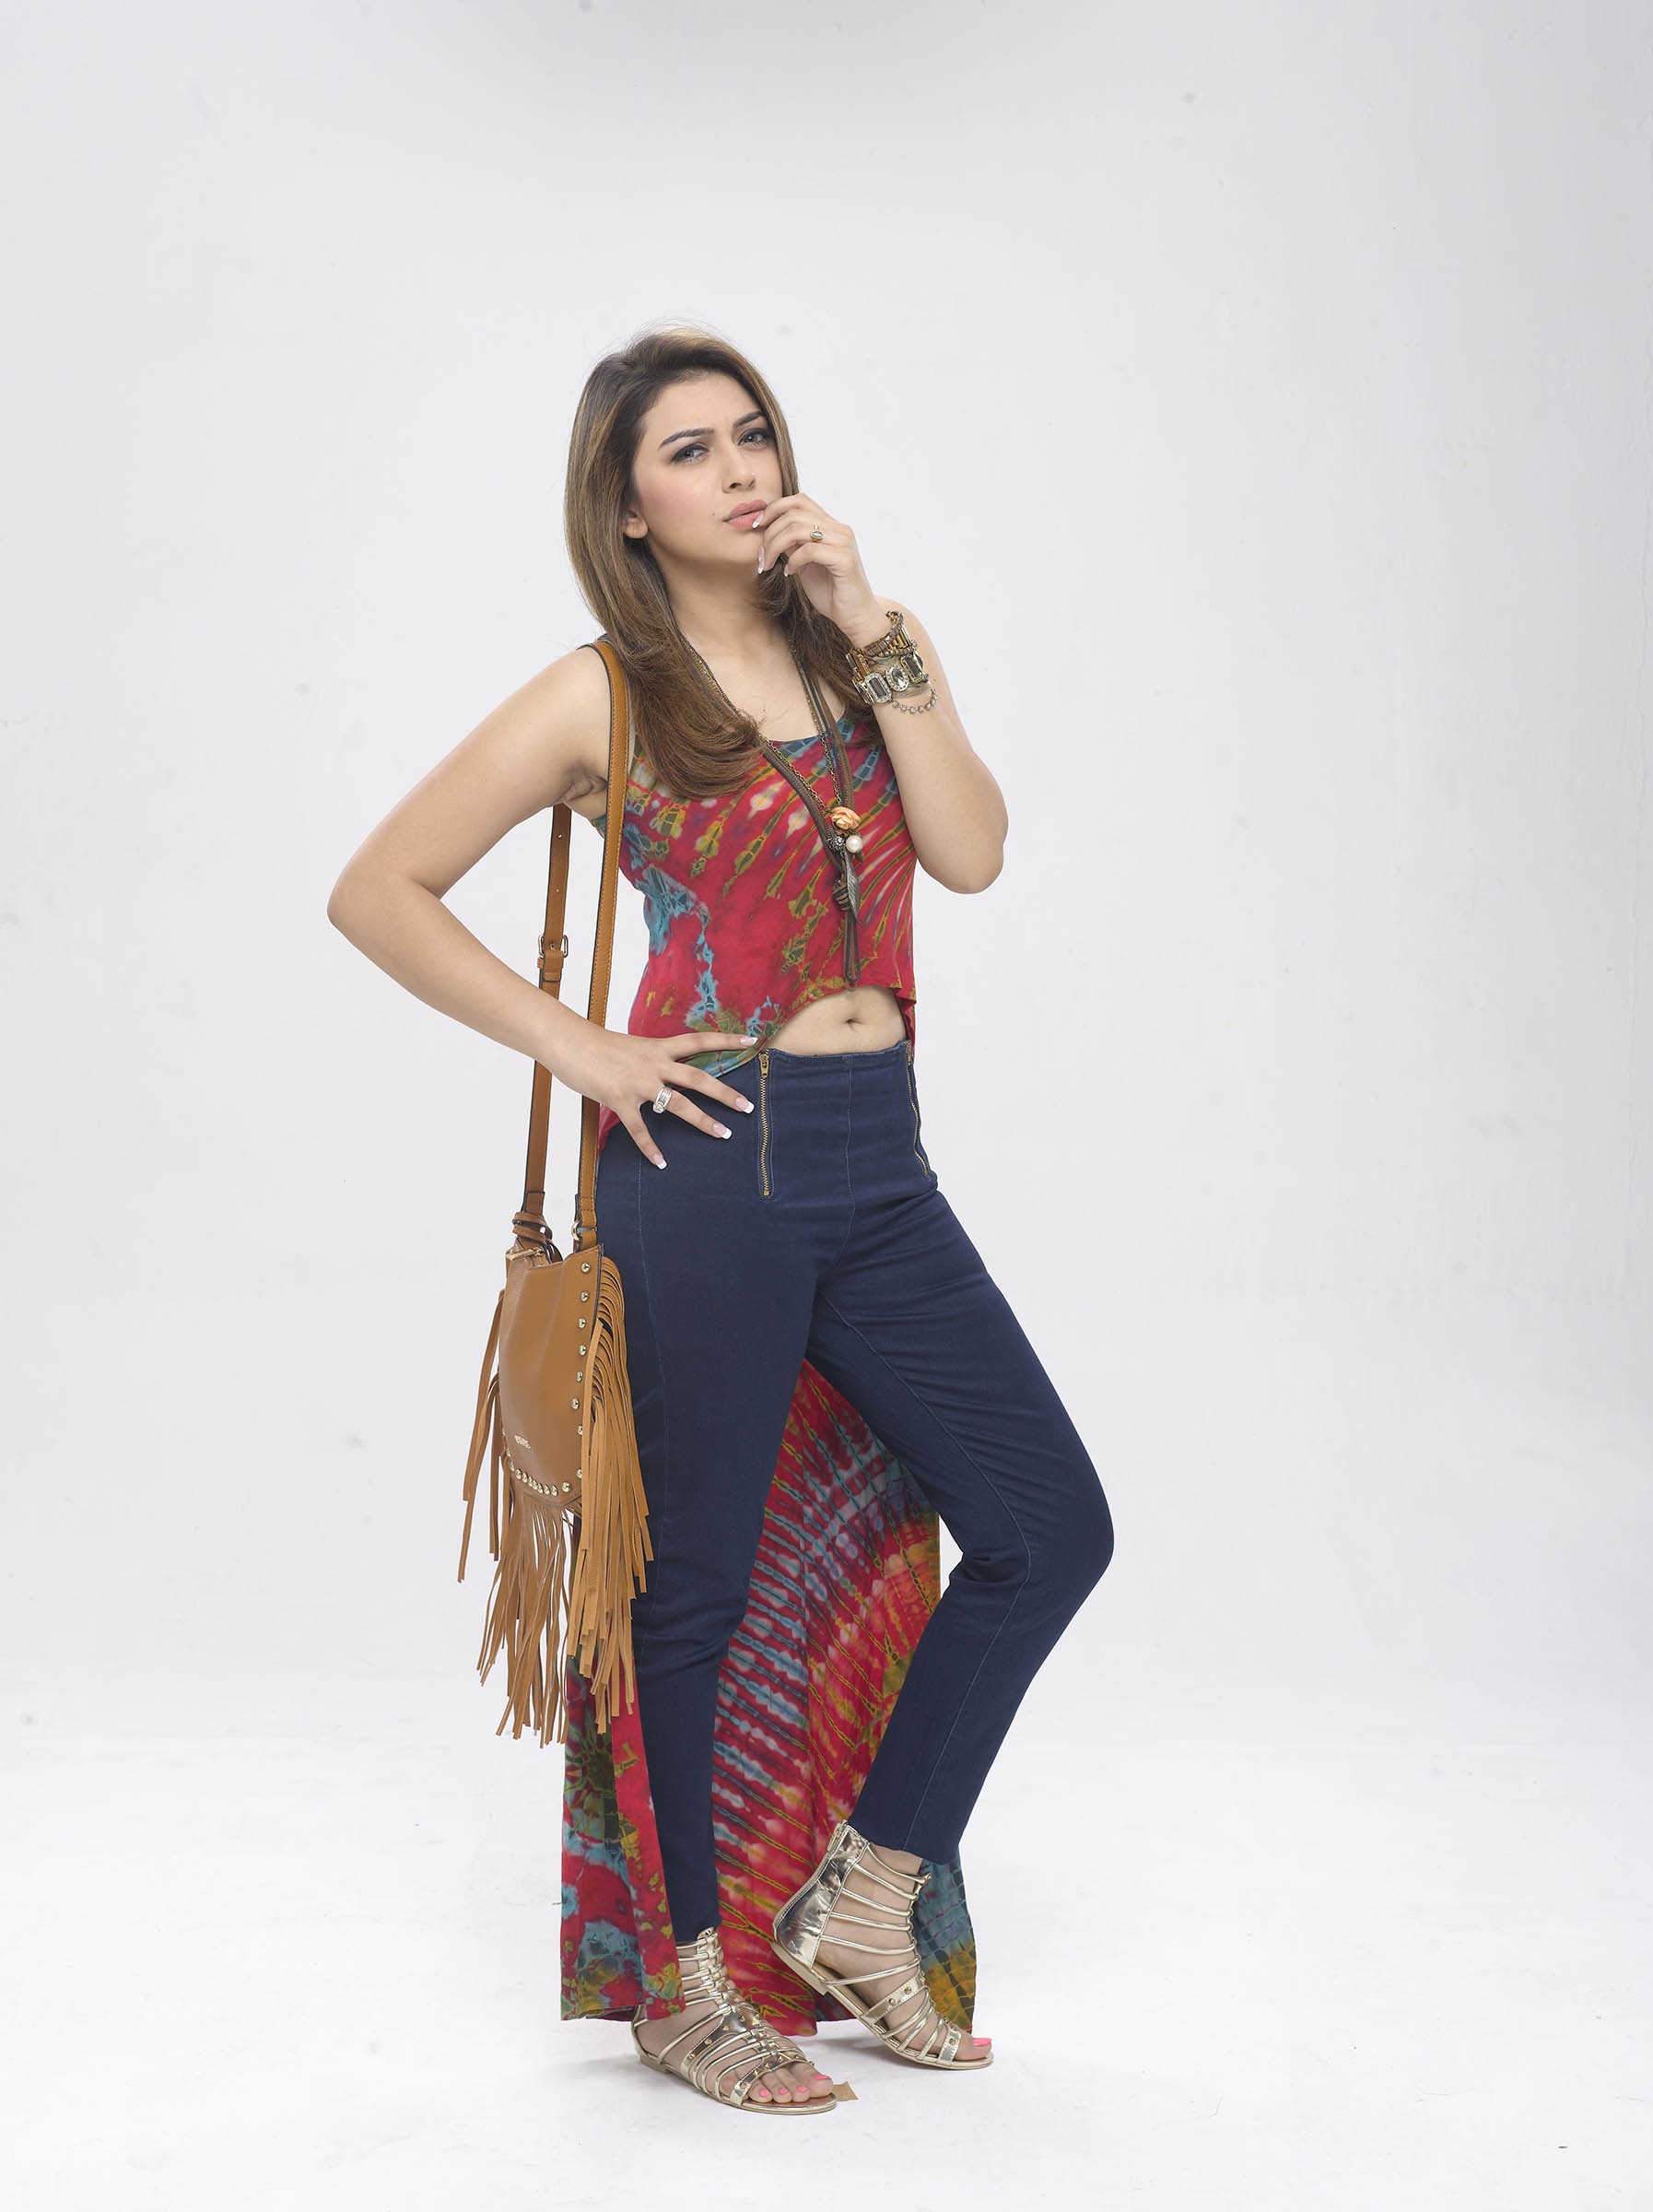 Hansika Hot In An Unseen Photoshoot